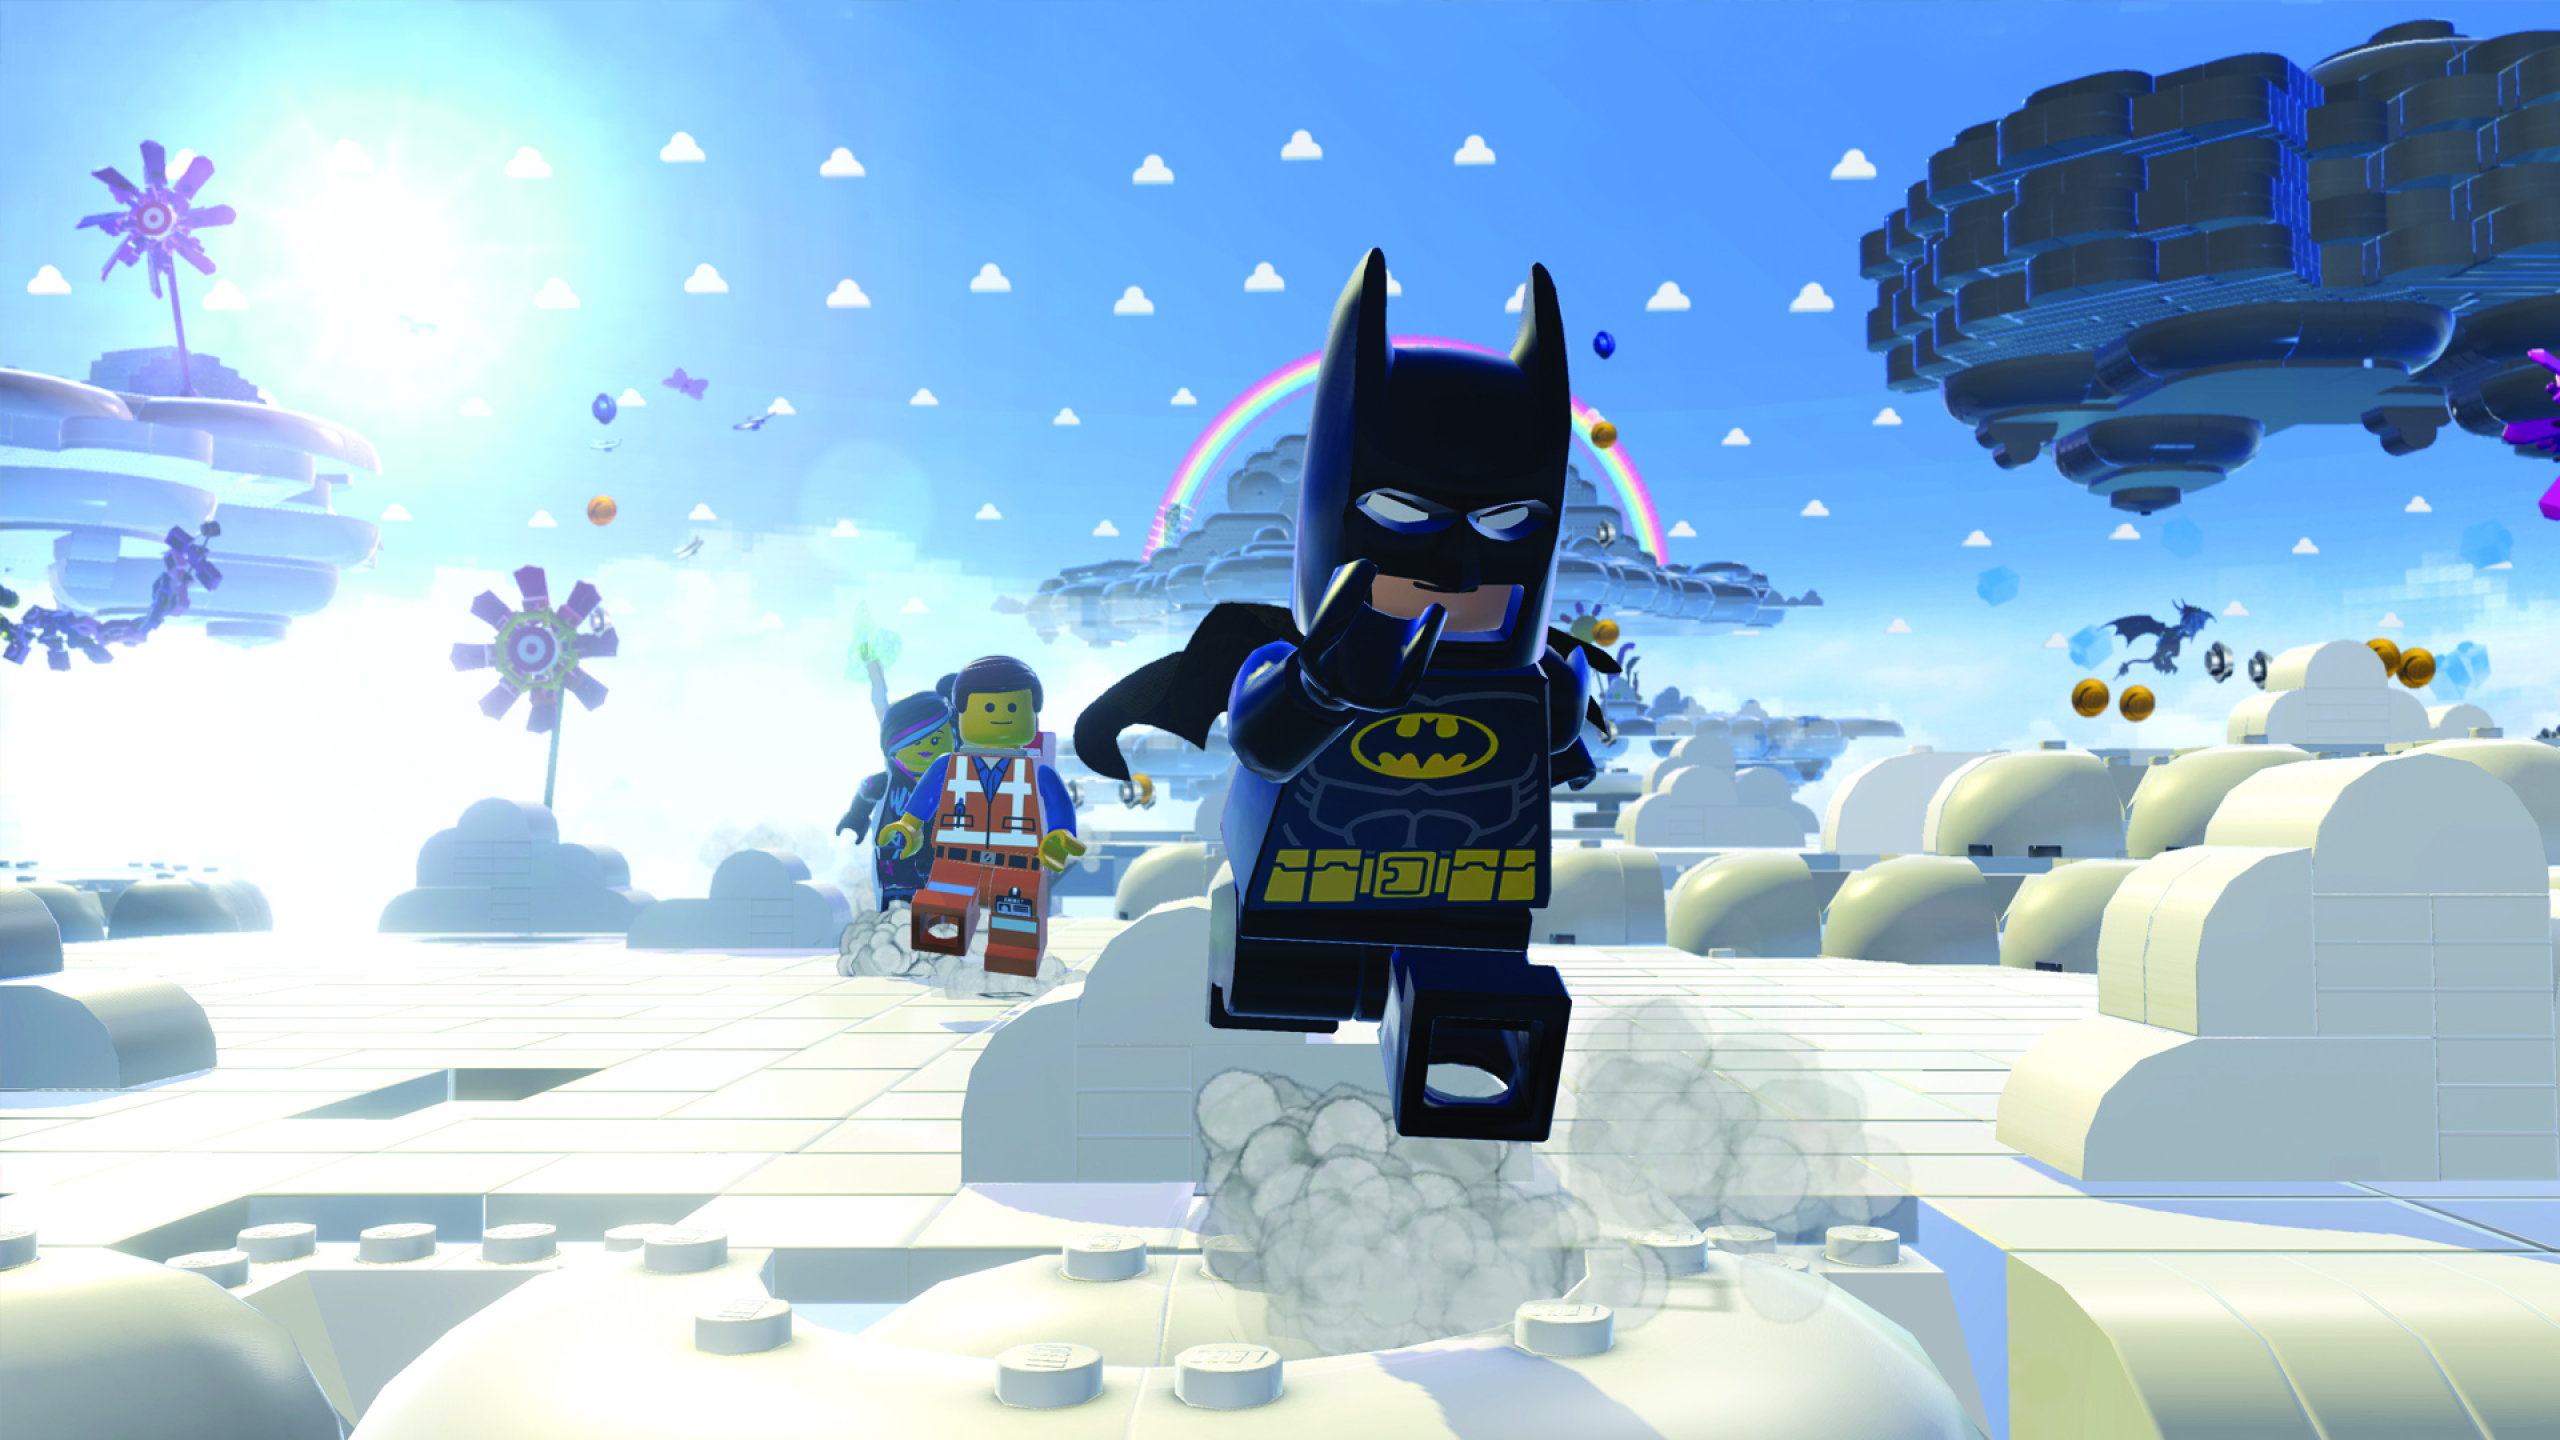 2560x1440 Resolution The Lego Movie Videogame Toys 1440p Resolution